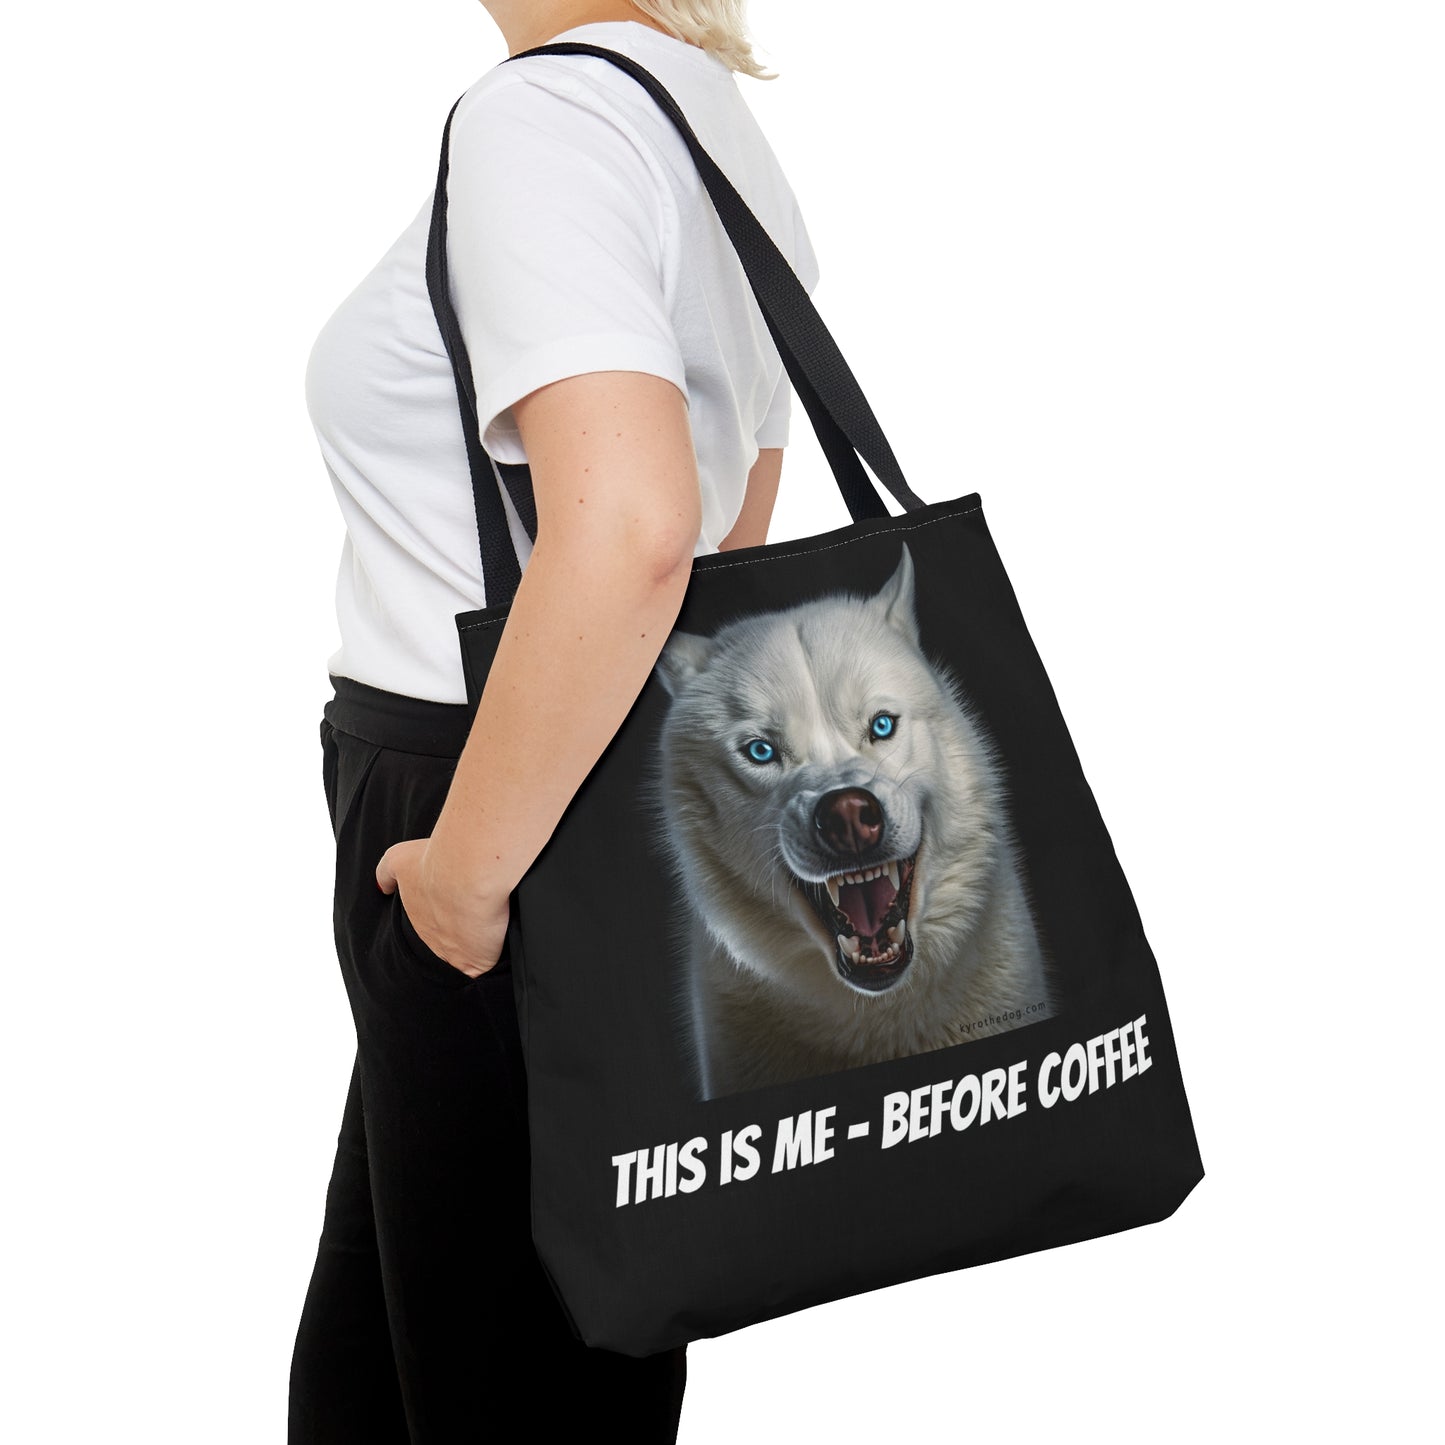 Tote Bag - Kyro "Coffee" - Different Images on Either Side of the Bag